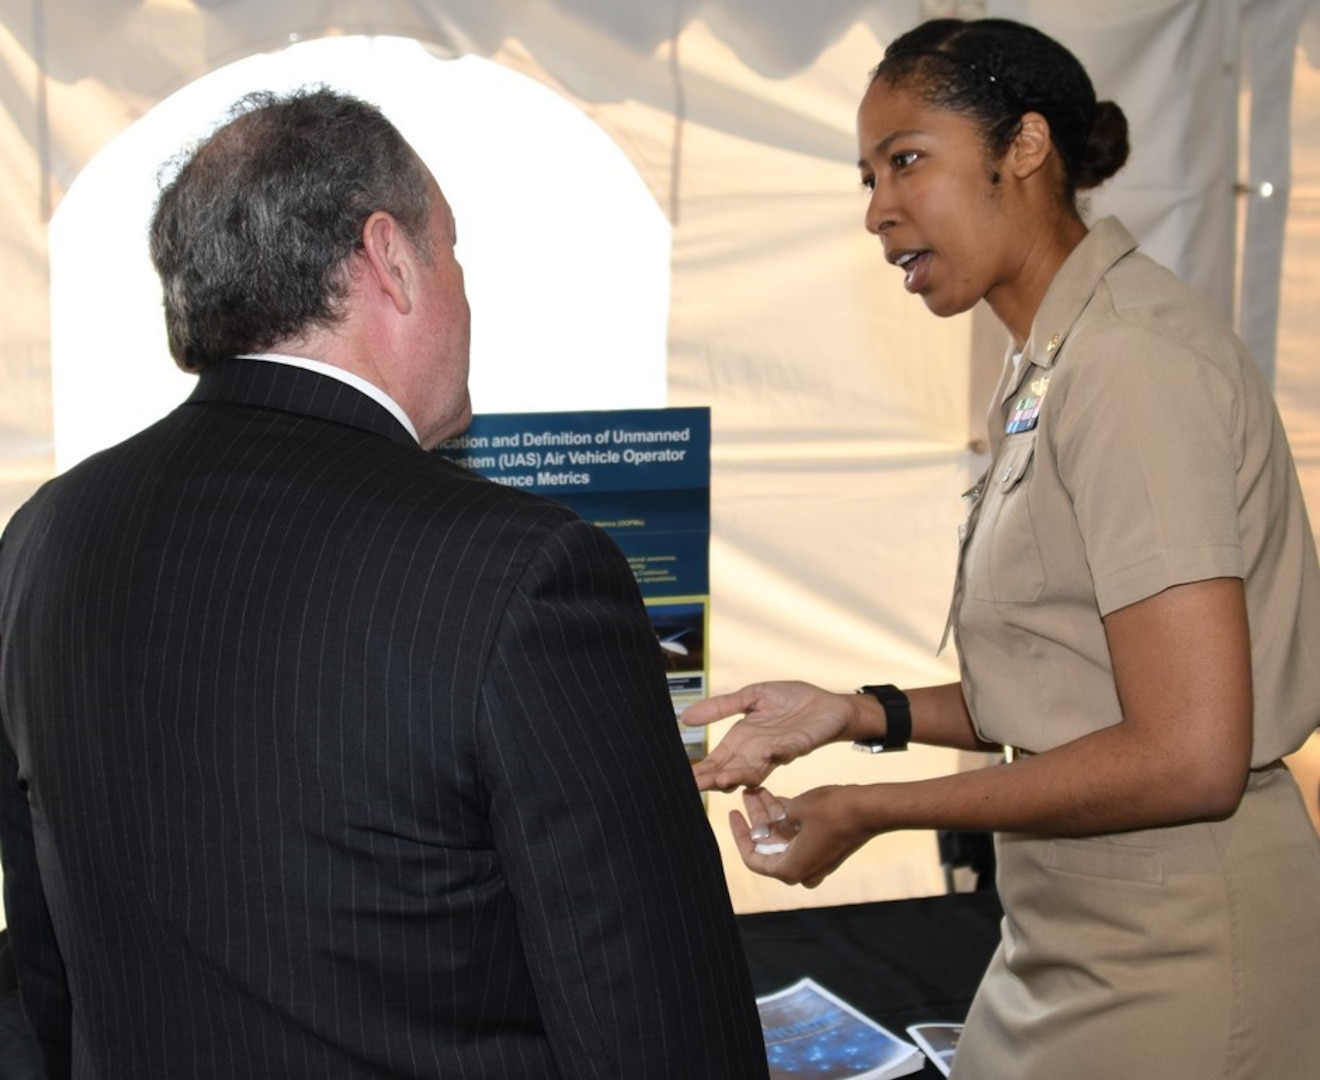 IMAGE: DAHLGREN, Va. (May 2, 2018) - Lt. Cmdr. Rolanda Findlay presents her technological project - Identification and Definition of Unmanned Aerial System Air Vehicle Operator Performance Metrics - at the two-day 2018 Naval Innovative Science and Engineering (NISE) Technical Exchange Meeting held at Naval Surface Warfare Center Dahlgren Division. More than 150 NISE-funded innovations, including Findlay's project, were presented to the Department of Defense technical leaders, scientists, and engineers who visited the Deputy Assistant Secretary of Defense for Research, Development, Test and Evaluation sponsored event to see and learn about the NISE projects and their alignment to naval systems and naval needs. (U.S. Navy photo/Released)